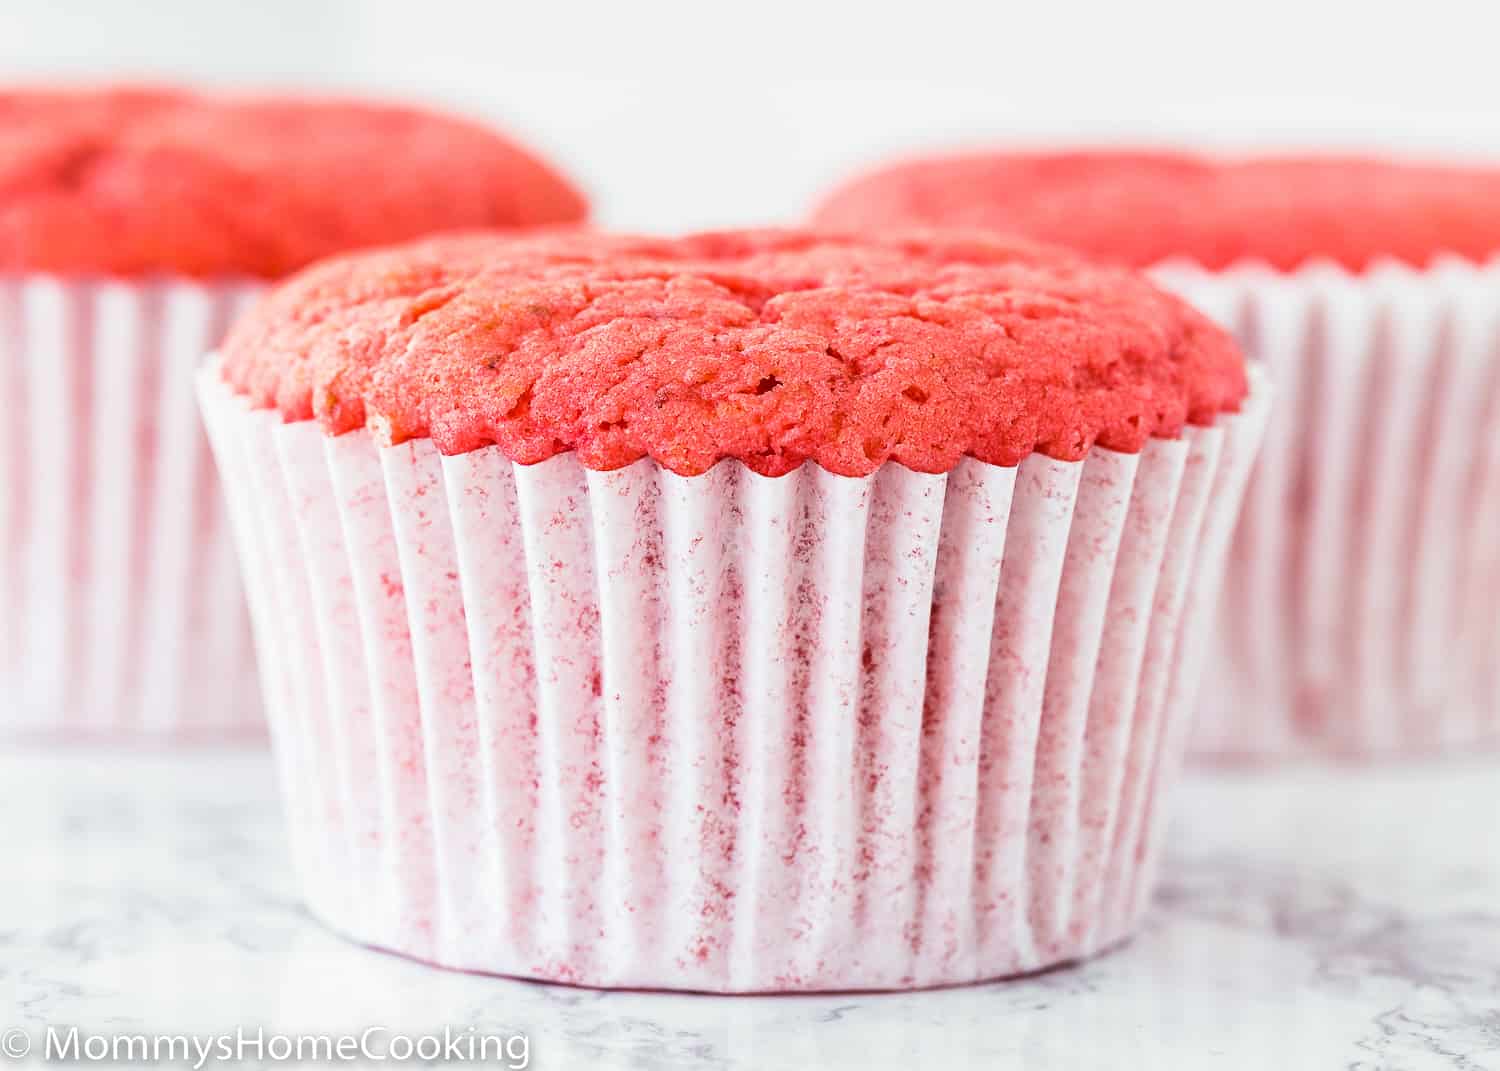 egg-free Strawberry cupcake over a marble surface.